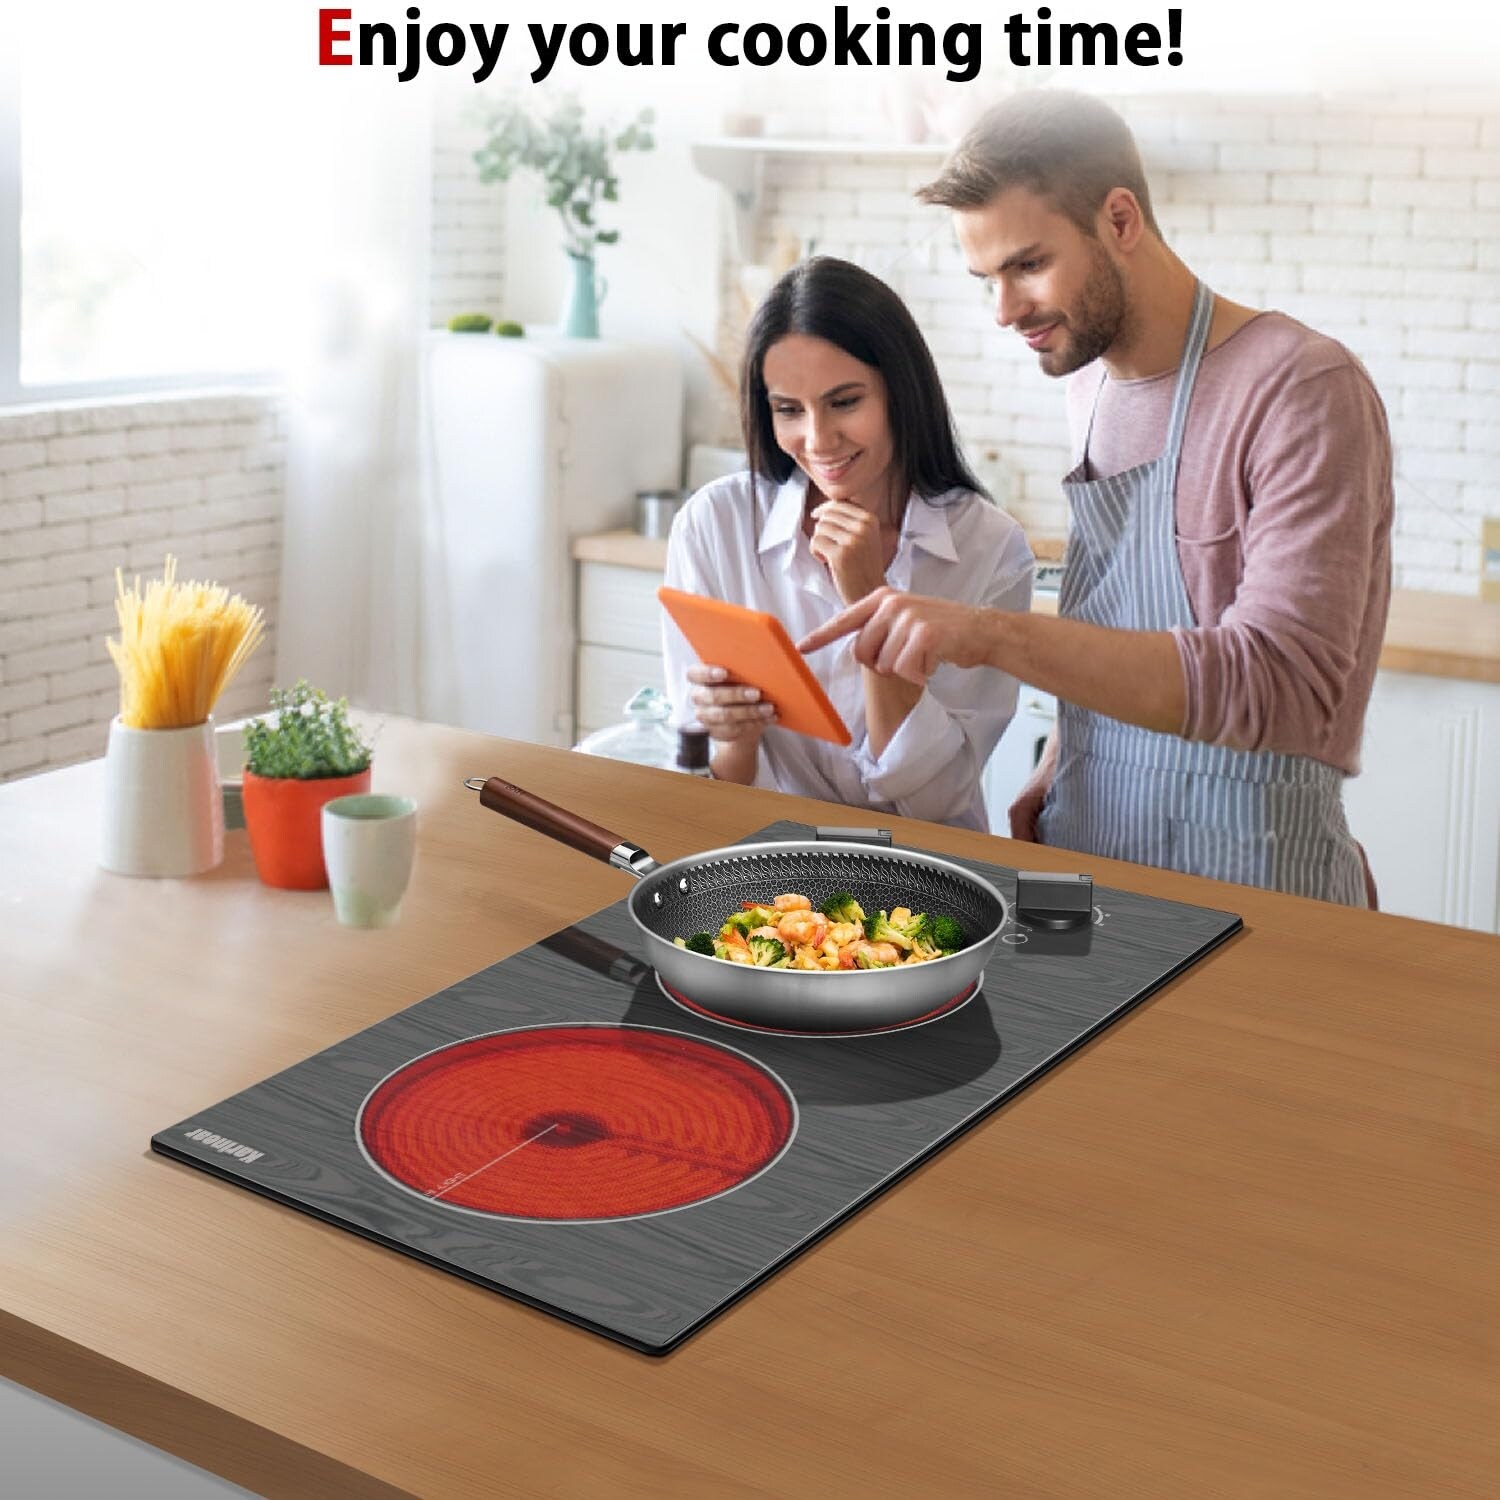 https://ak1.ostkcdn.com/images/products/is/images/direct/7c9ce941cc0e97601d4226c9ab2e63e4a59f9e84/Electric-Cooktop-2-Burners%2C-110v-Portable-Electric-Stove-Top-with-Knob%2C-Glass-Cooktop%2CWoodgrain-Pattern-12-Inch-110v-Outlet-Plug.jpg